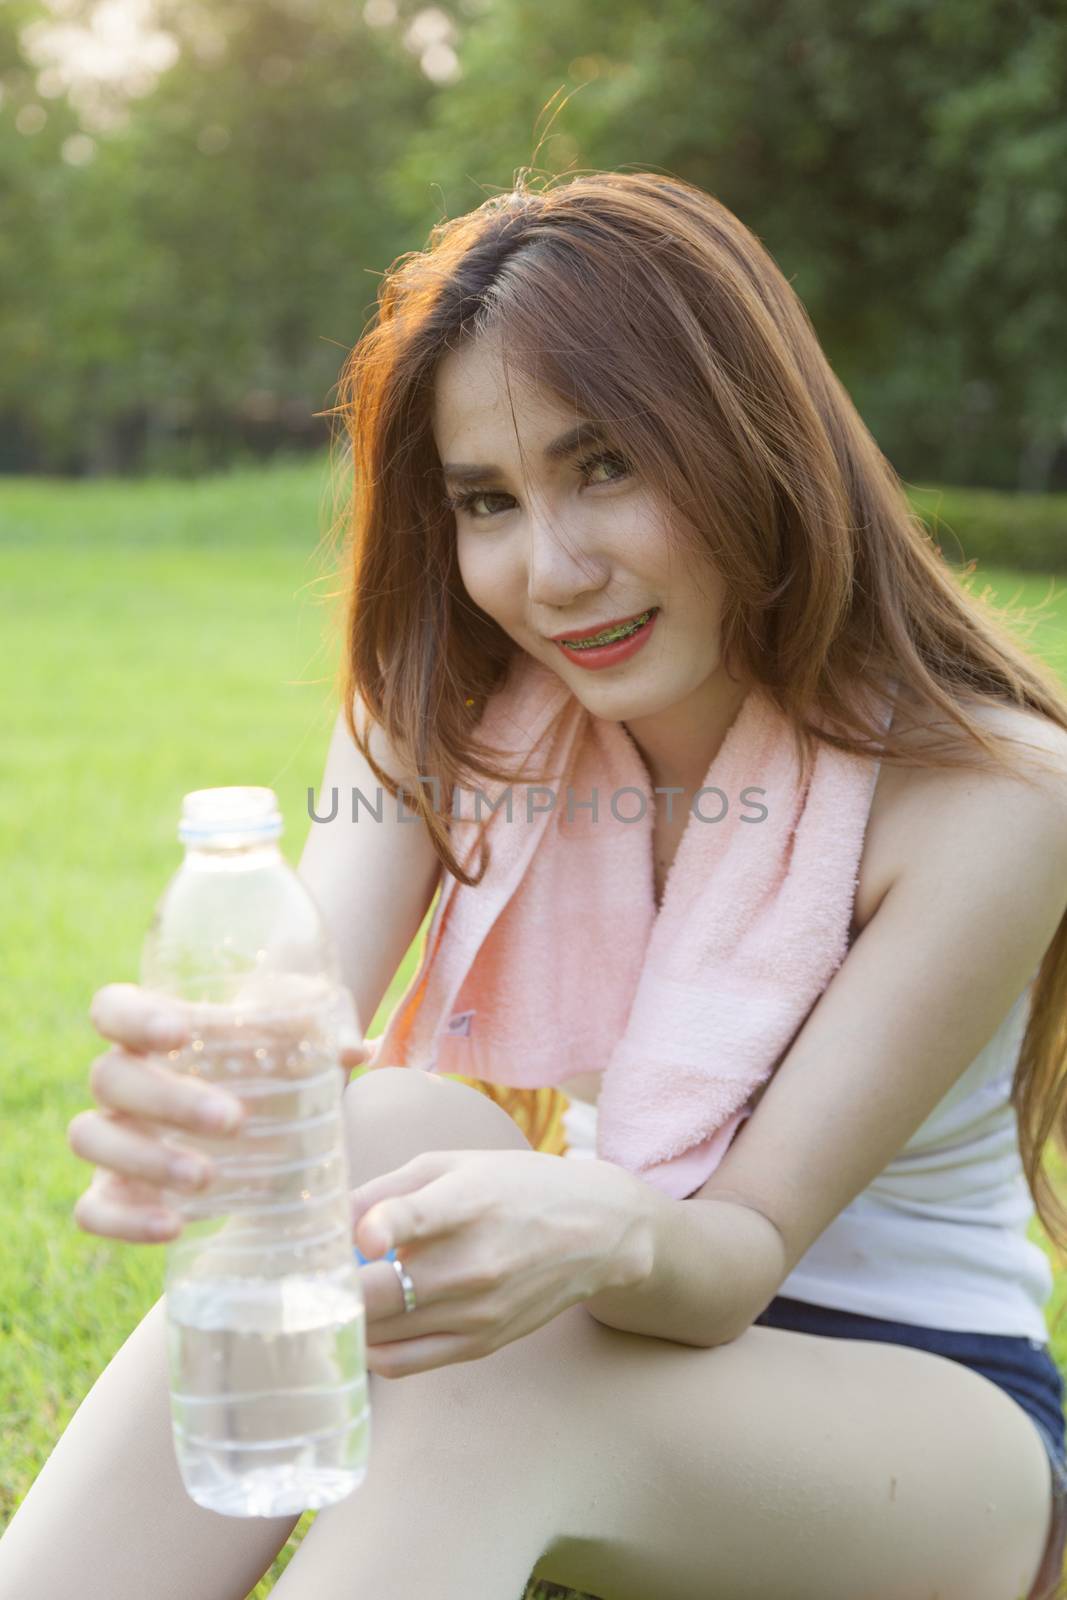 Woman holding a bottle of water and handed it to. by a454